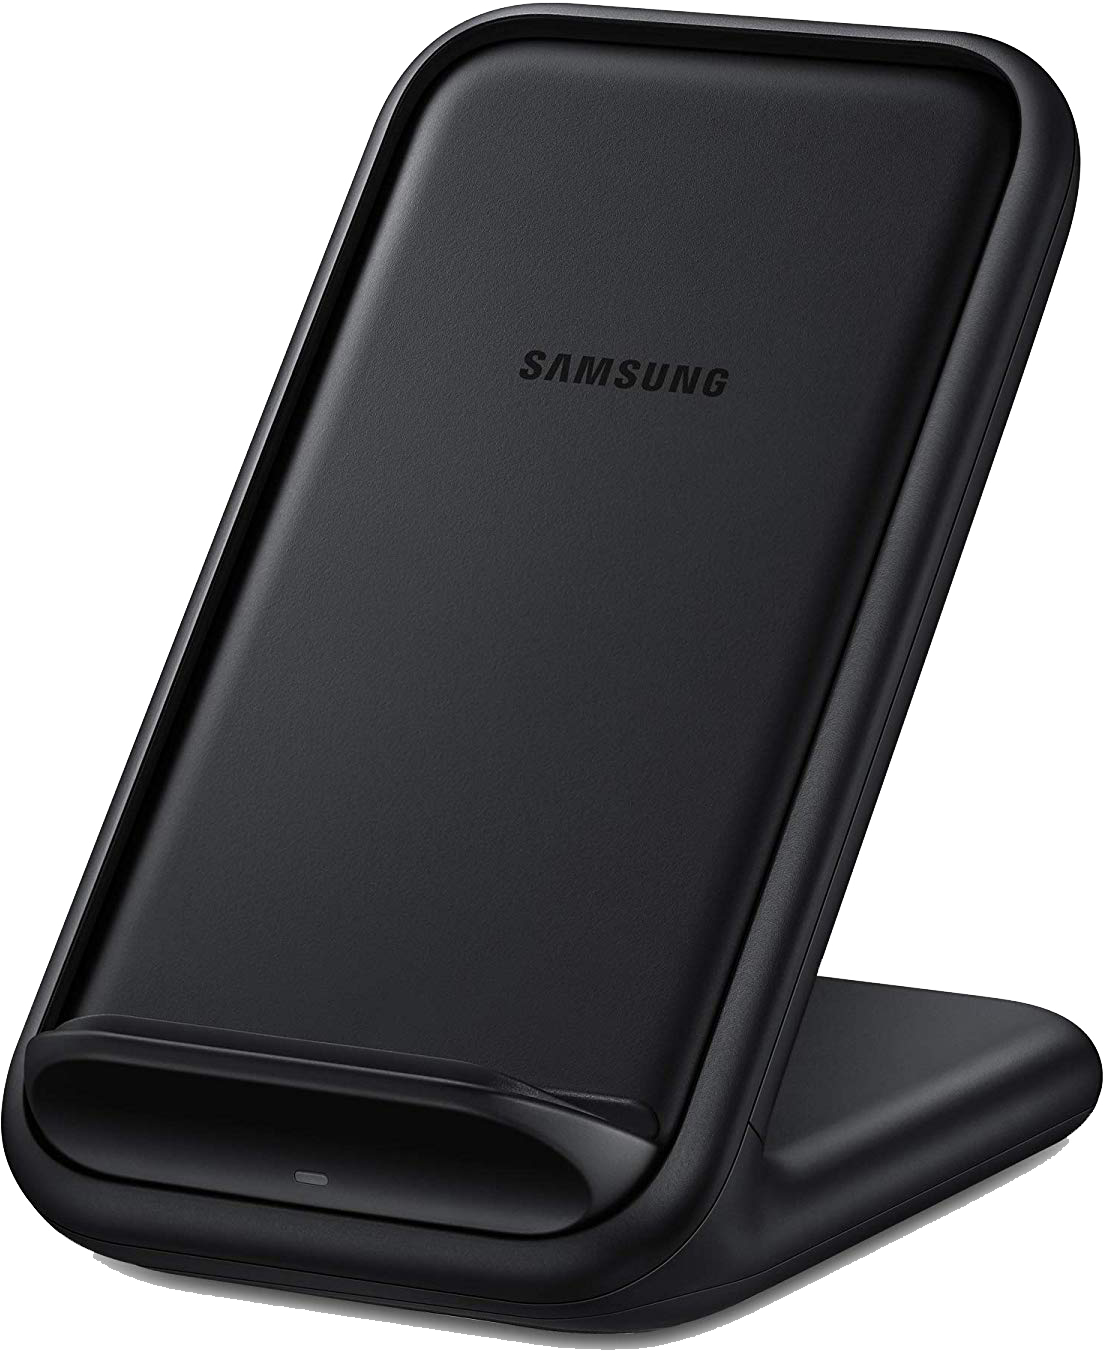  Samsung 15W Fast Charge 2.0 Wireless Charger Stand